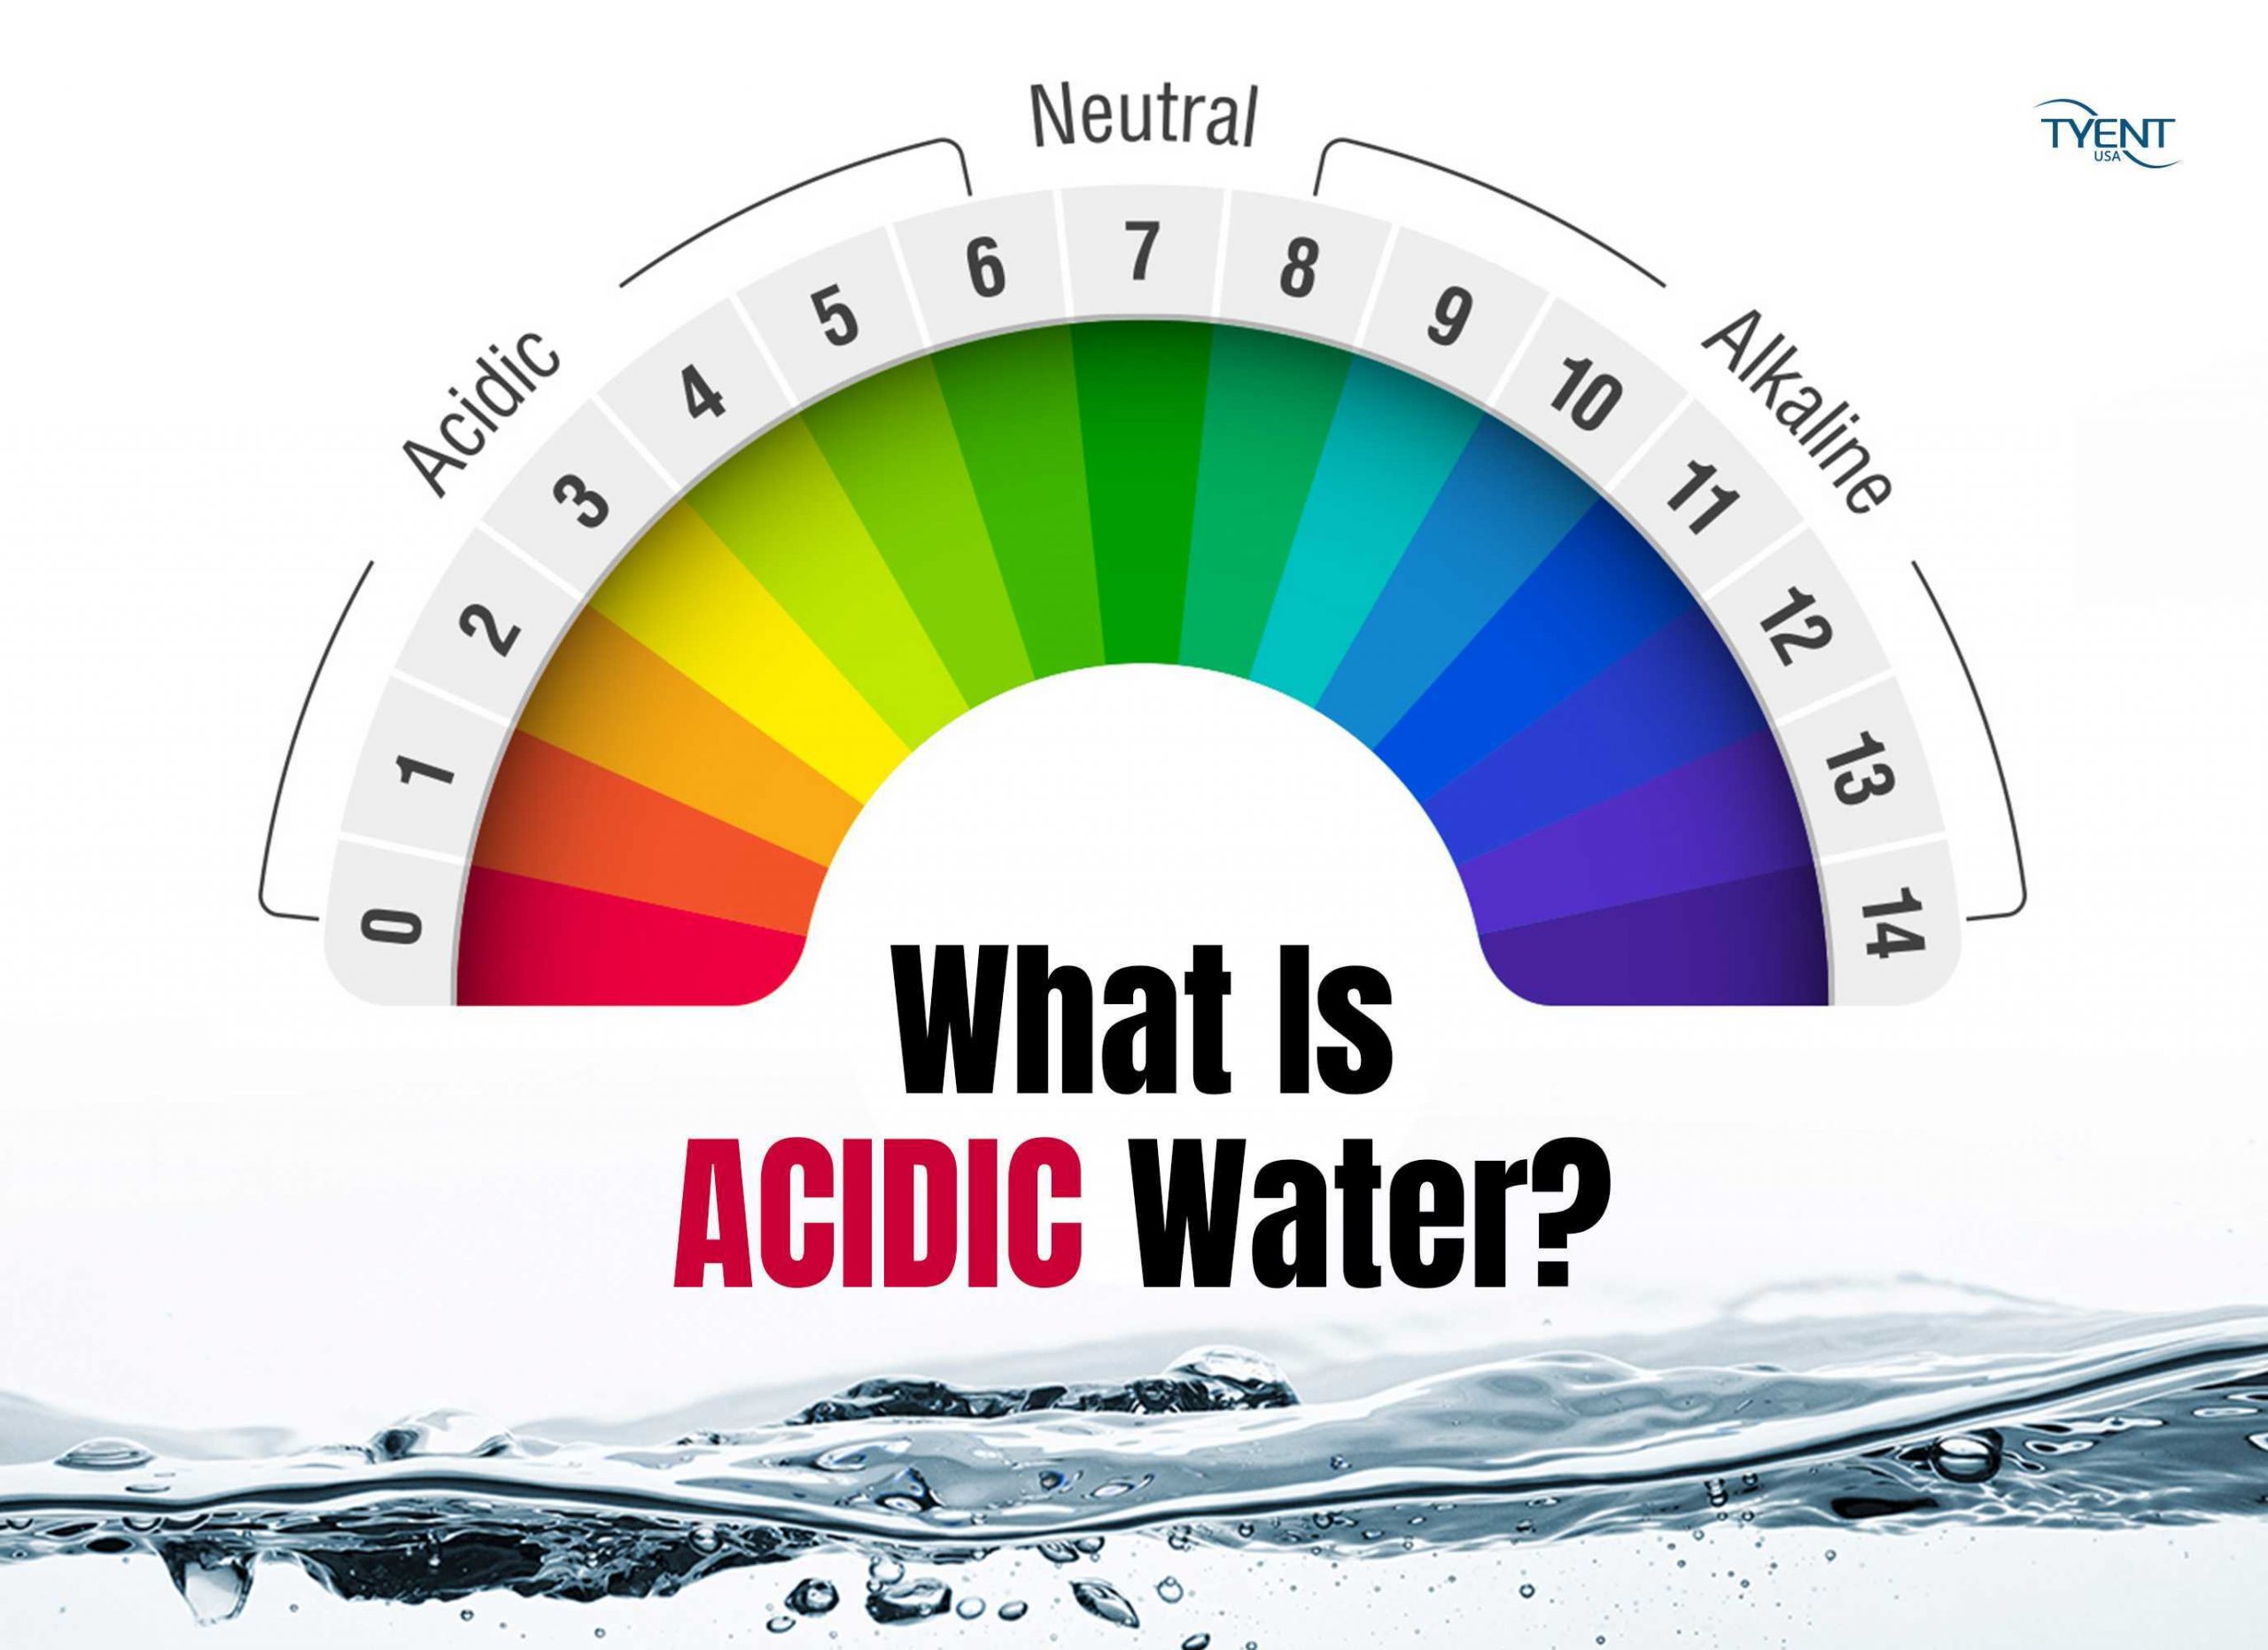 What Is Acidic Water?